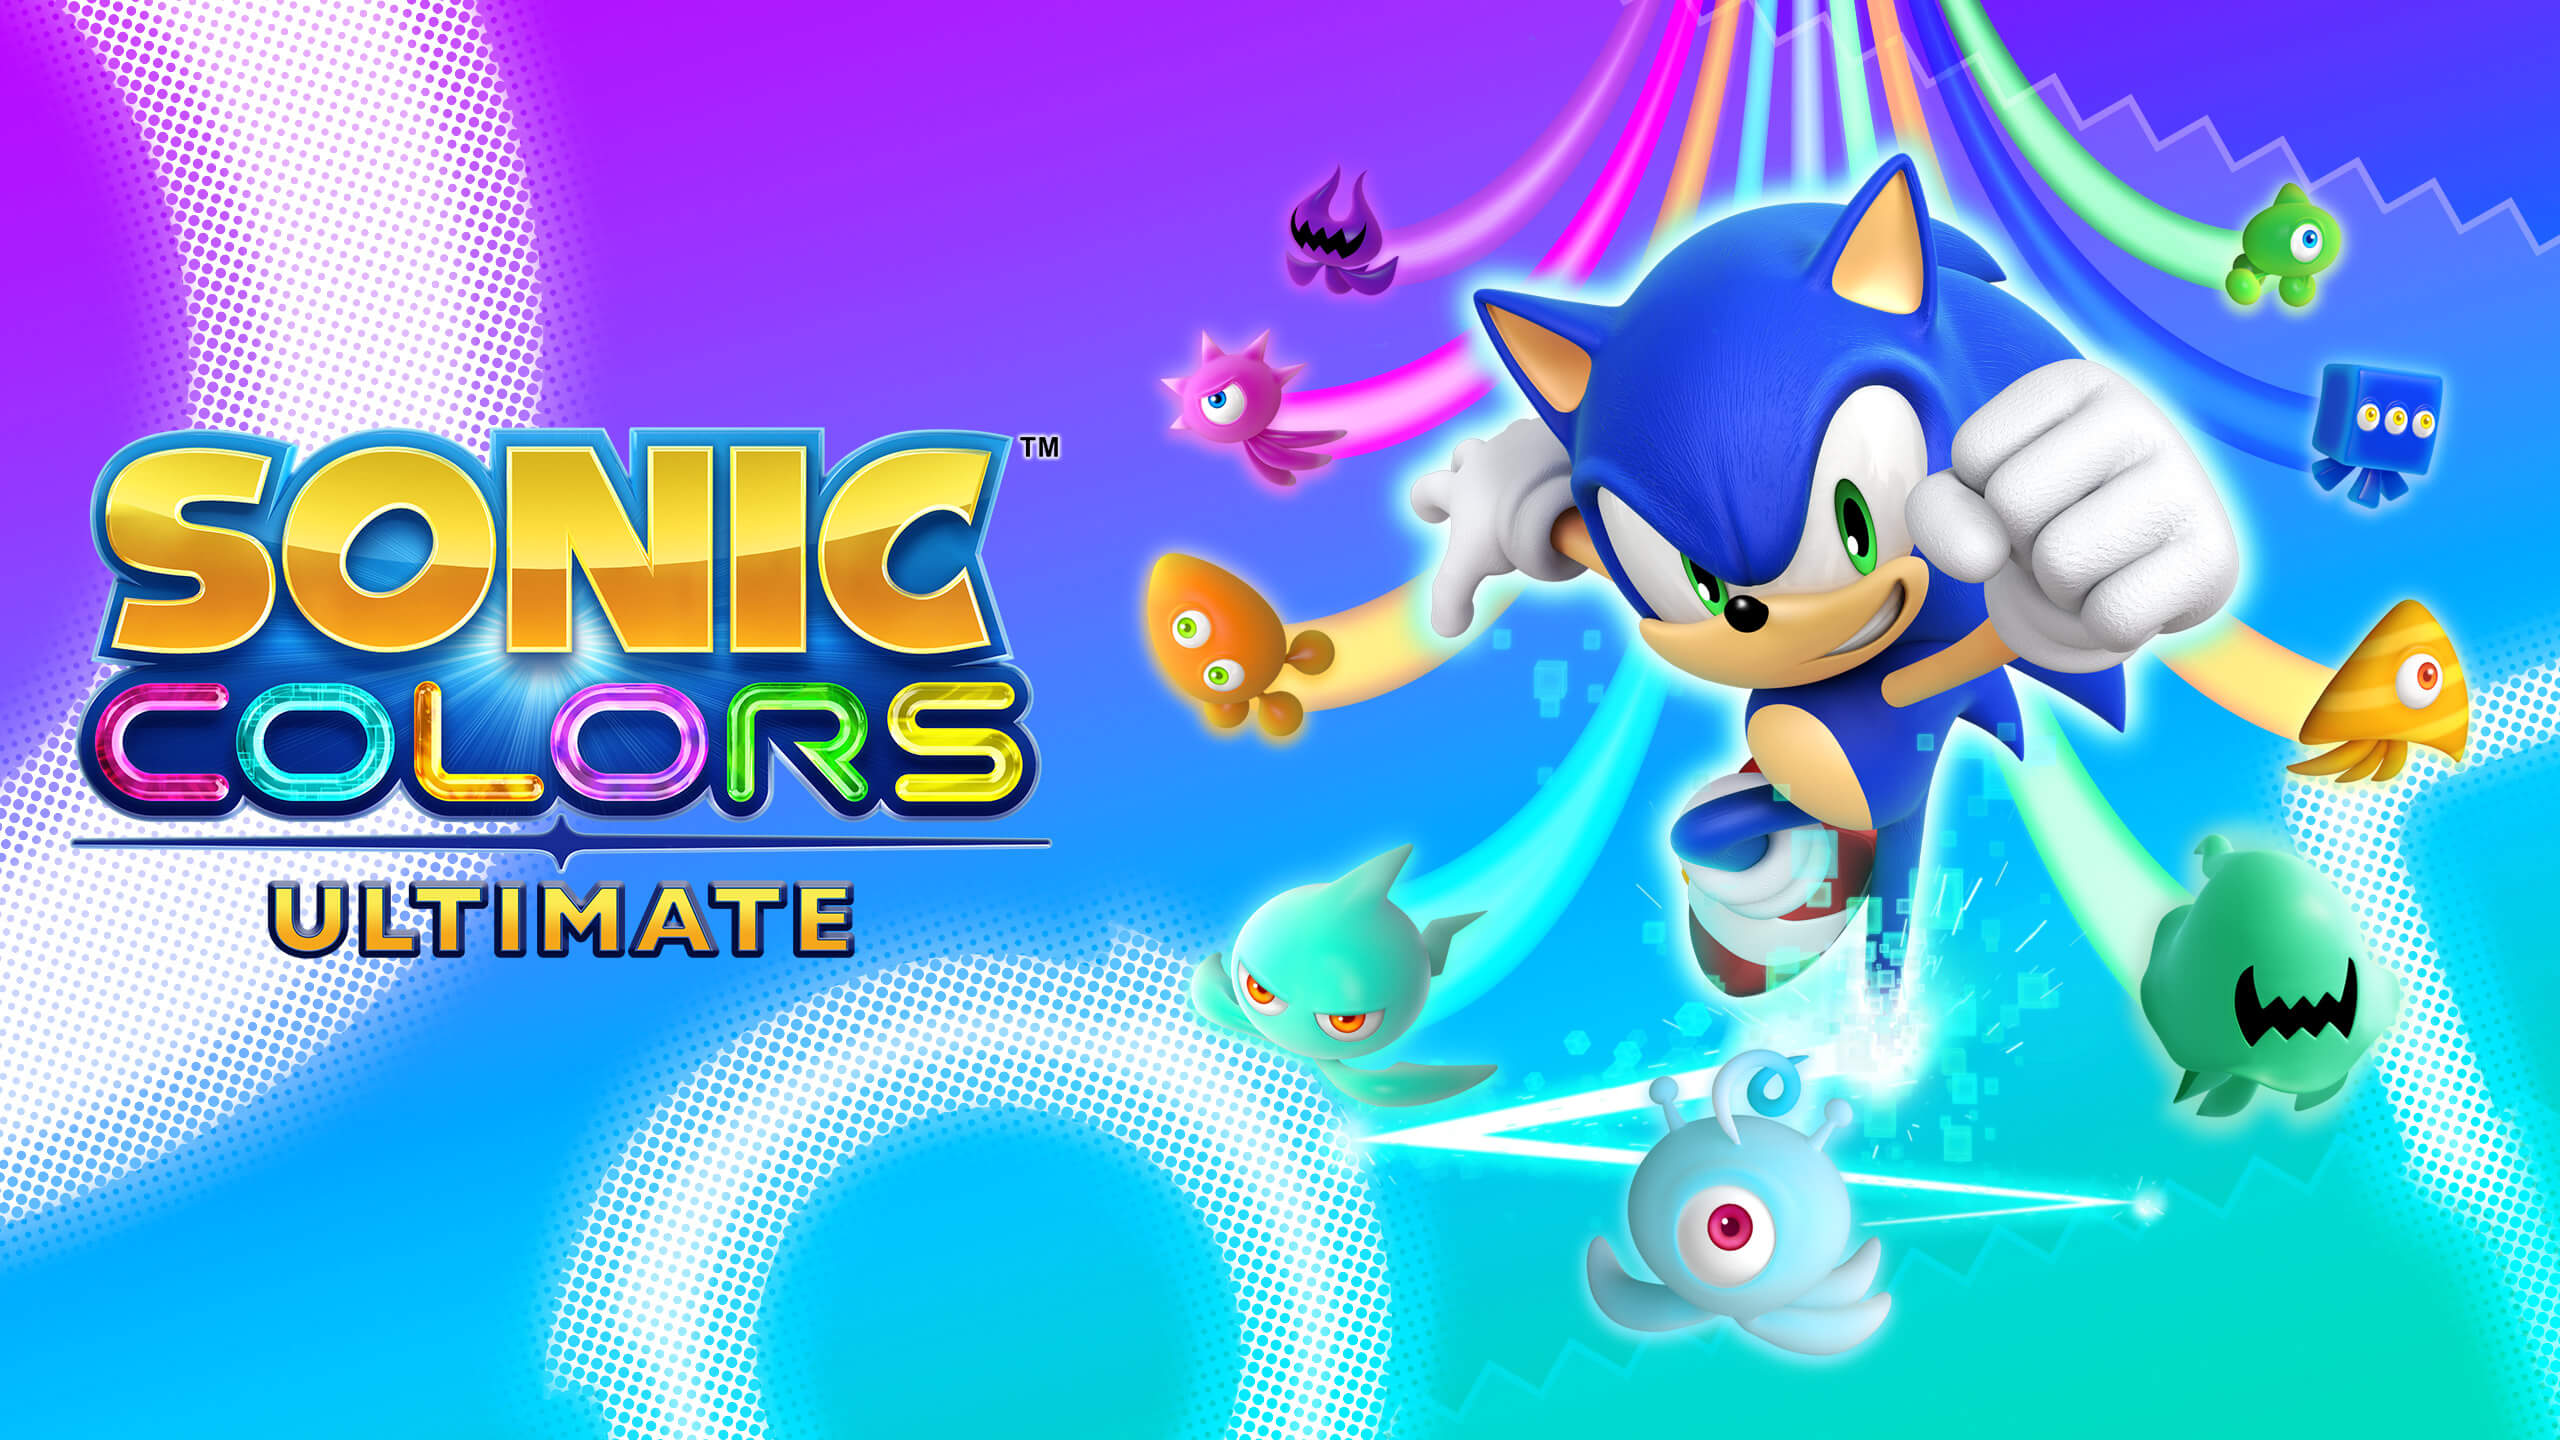 Sonic Colors: Ultimate update out now (version 3.0), patch notes